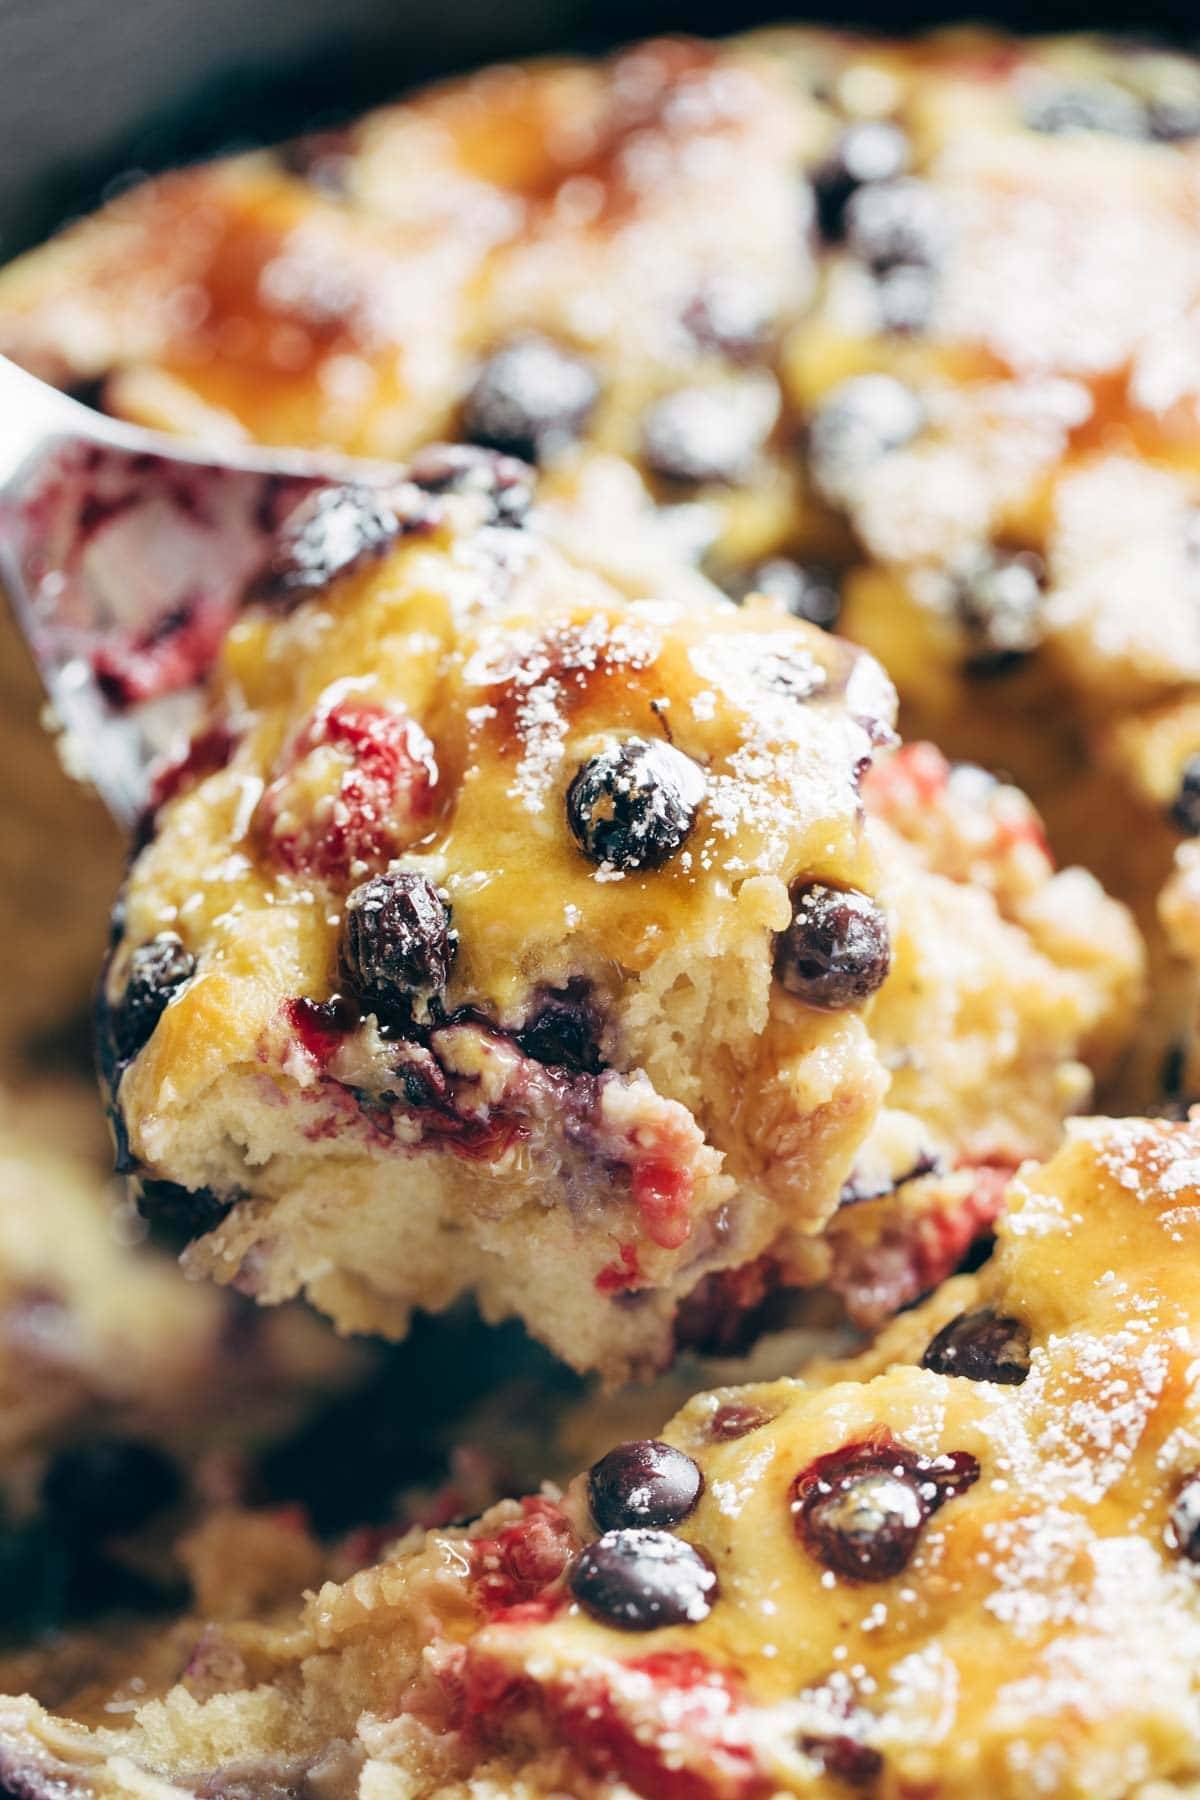 French Toast Casserole with ricotta, berries, and a SUPER EASY homemade dough. no canned biscuits, no cream cheese - just beautiful, easy, real food brunch! | pinchofyum.com